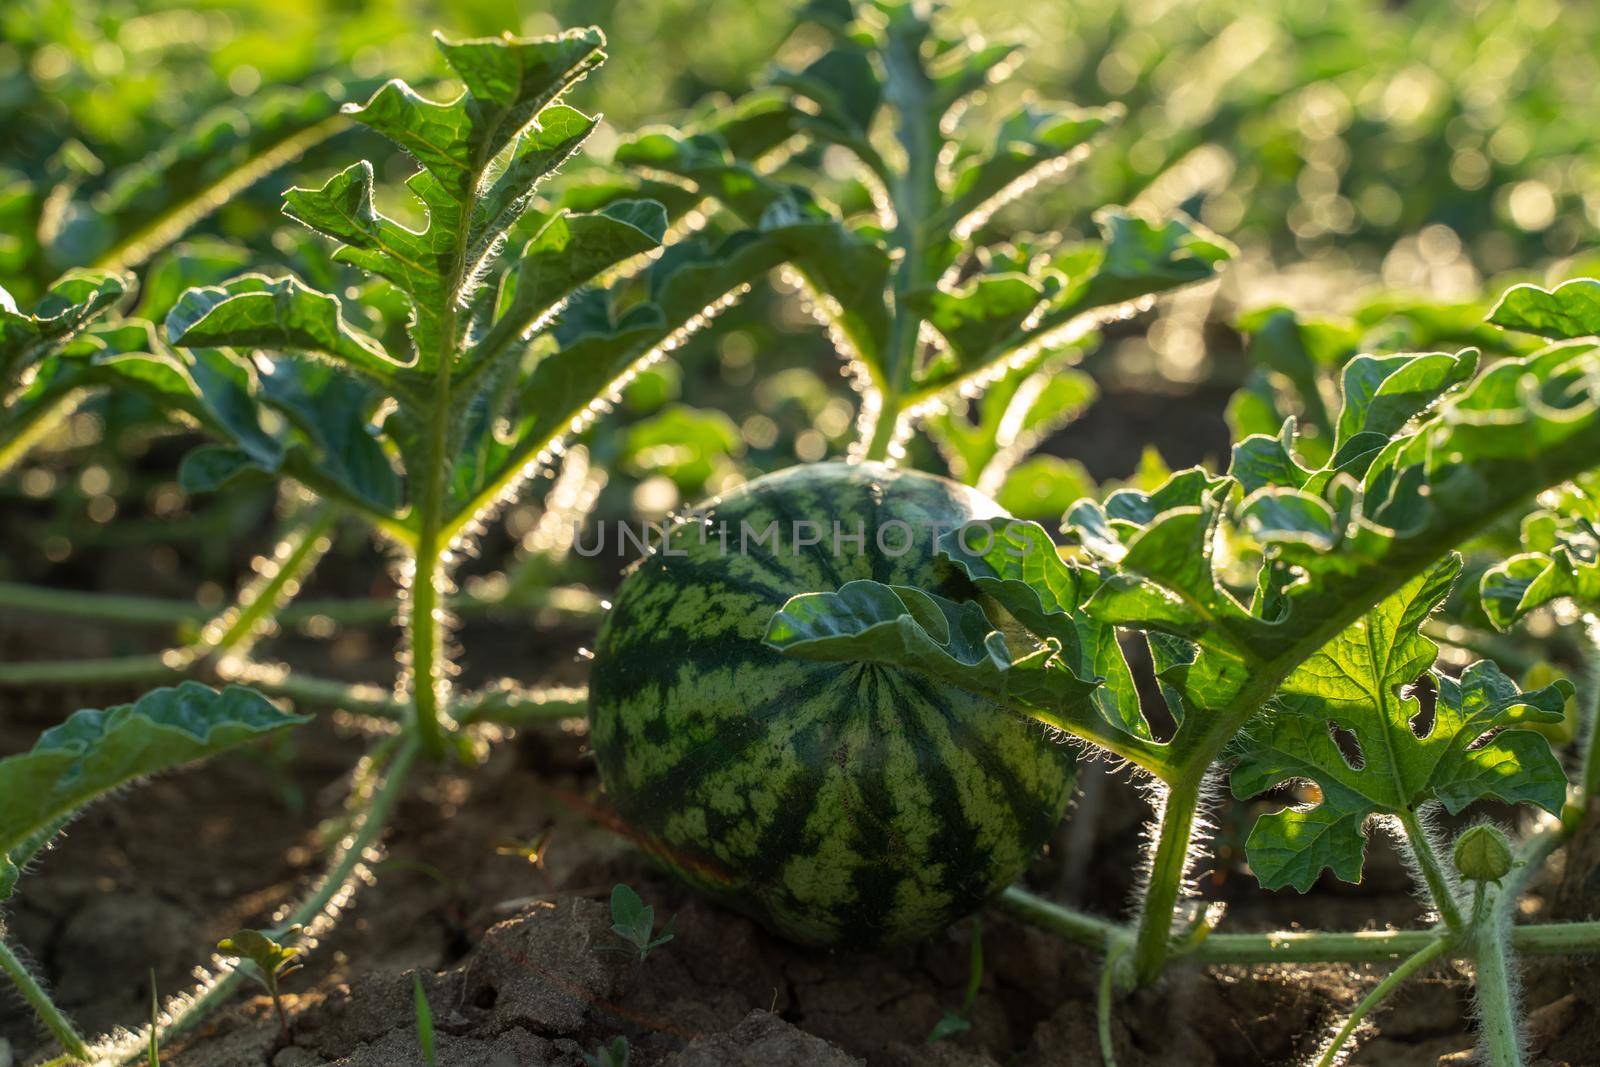 Watermelon grows on a green watermelon plantation in summer. Agricultural watermelon field